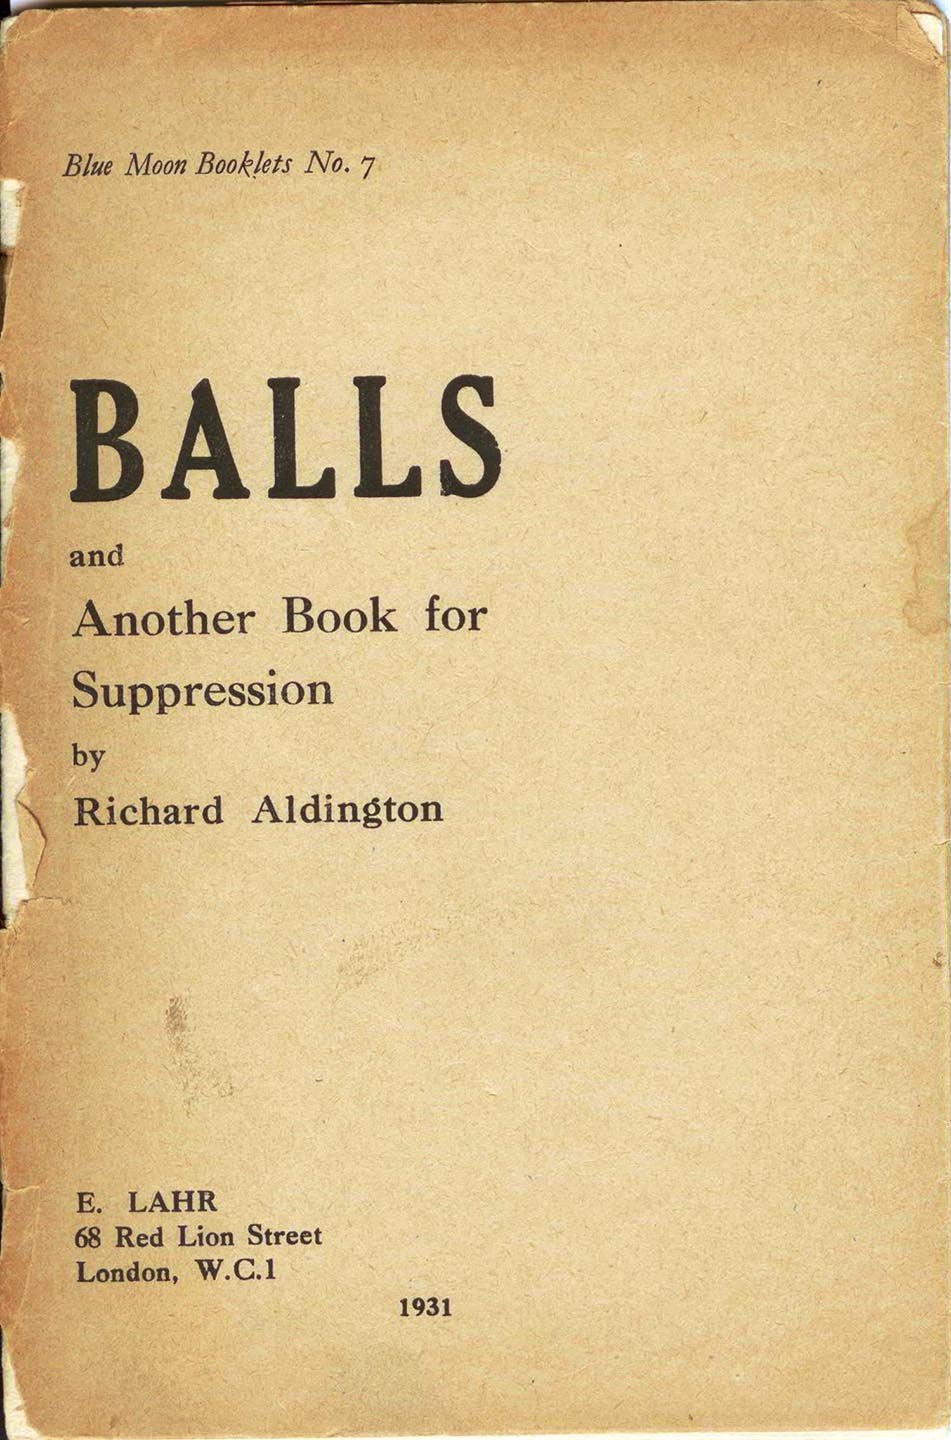 Balls and Another Book for Suppression